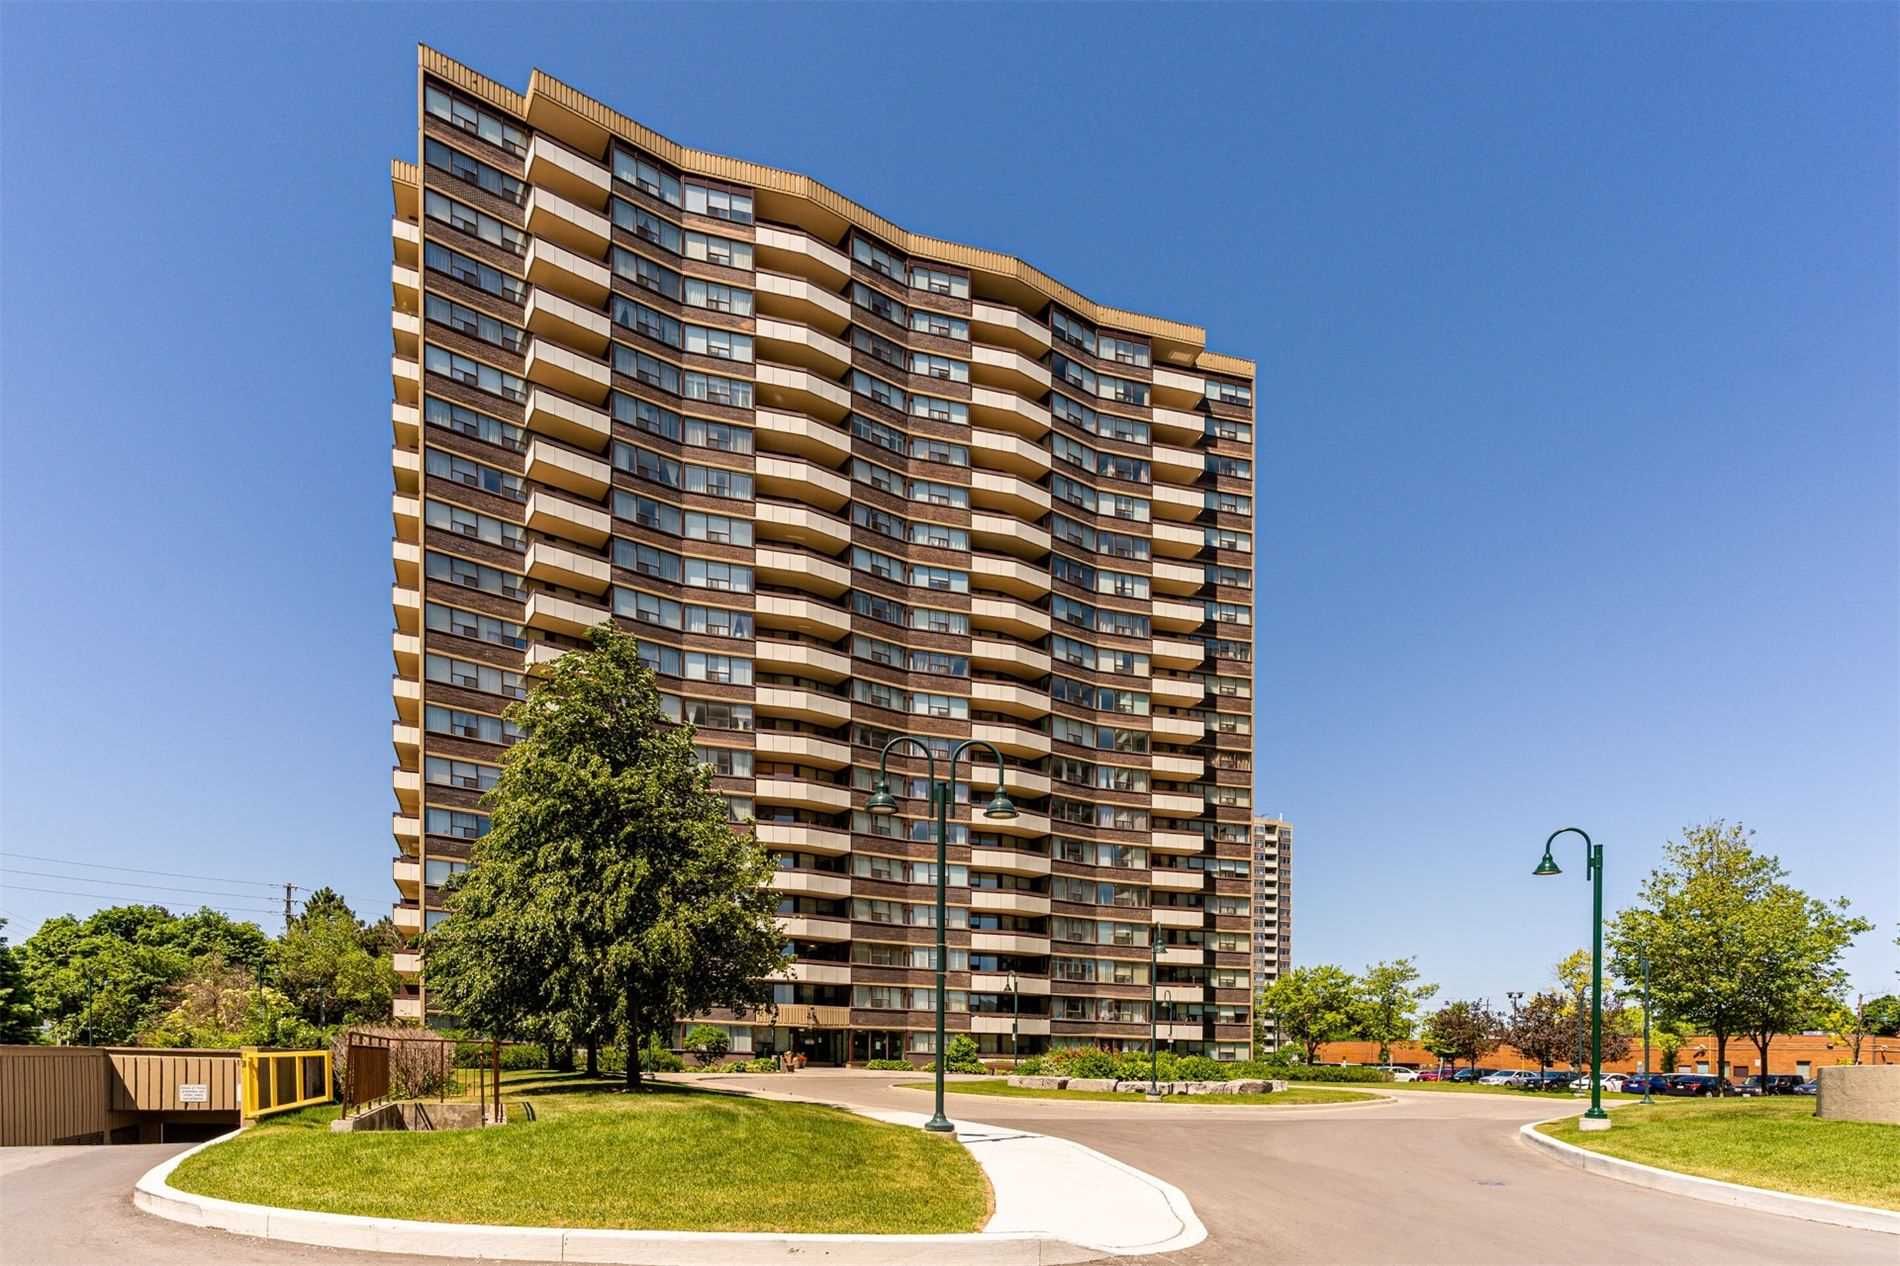 45-65 Huntingdale Blvd. This condo at Royal Crest III Condos is located in  Scarborough, Toronto - image #2 of 2 by Strata.ca